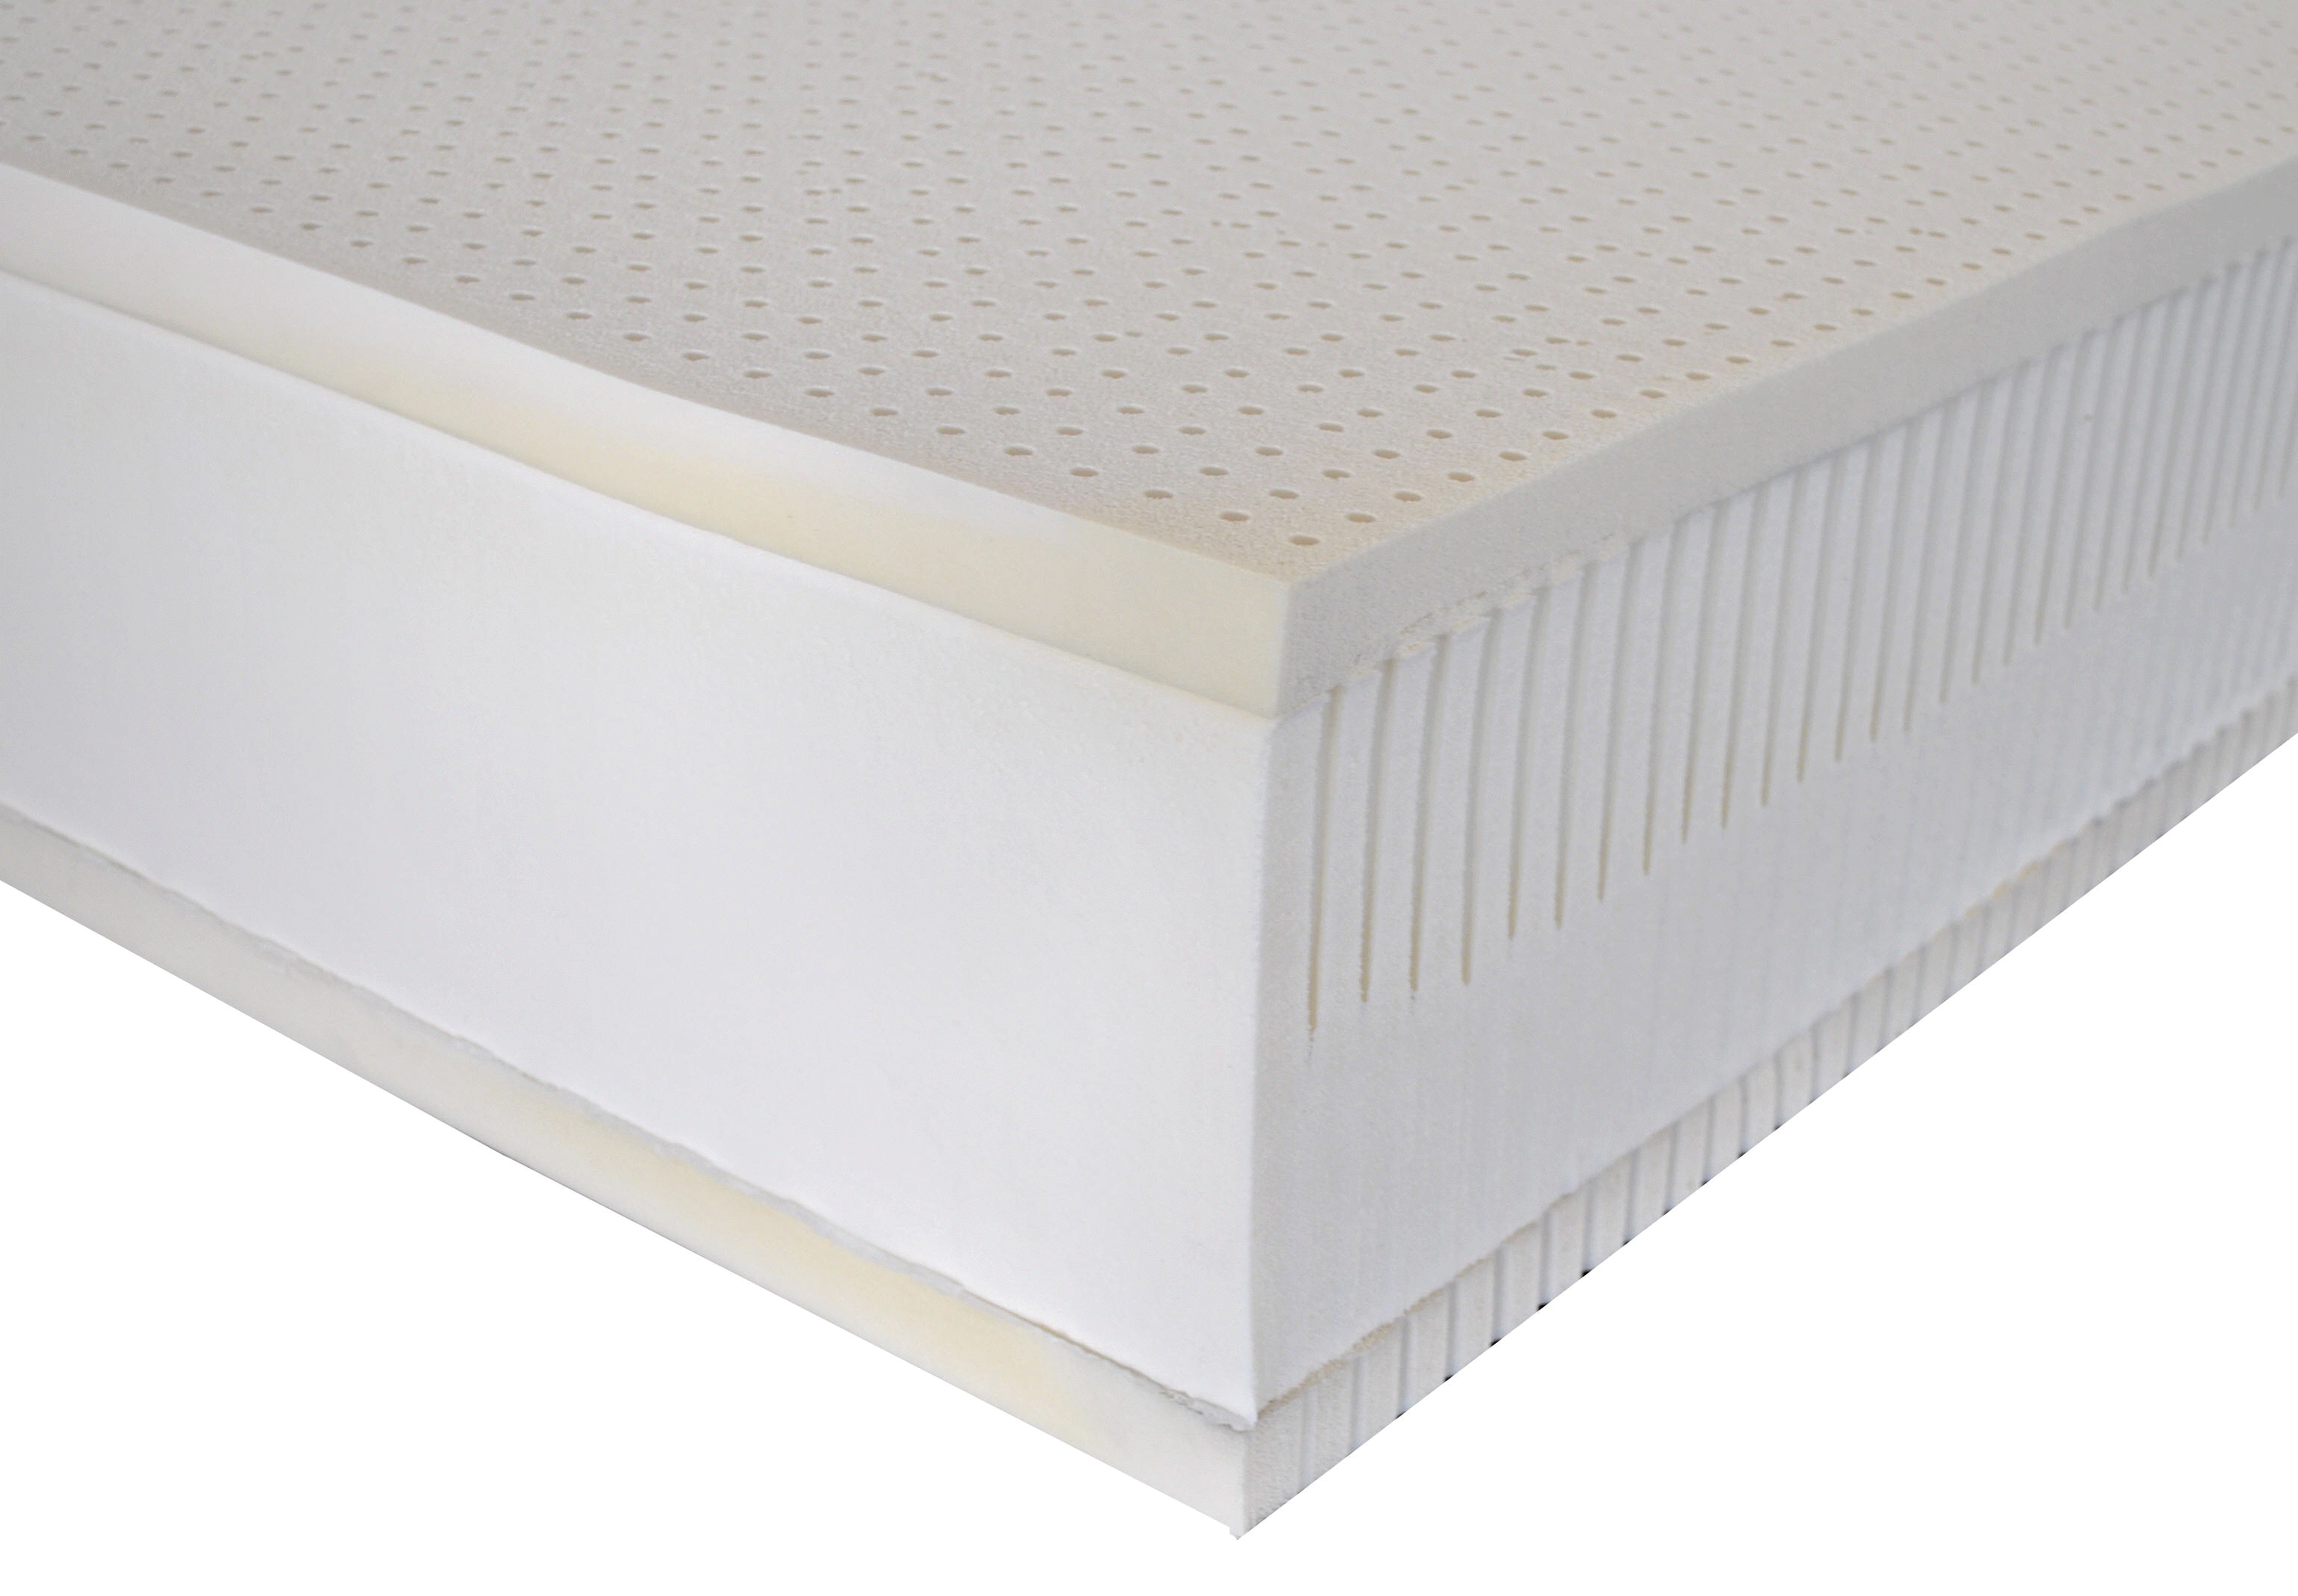 sale prices are for 100% Pure Talalay Latex Foam electric adjustable bed mattress